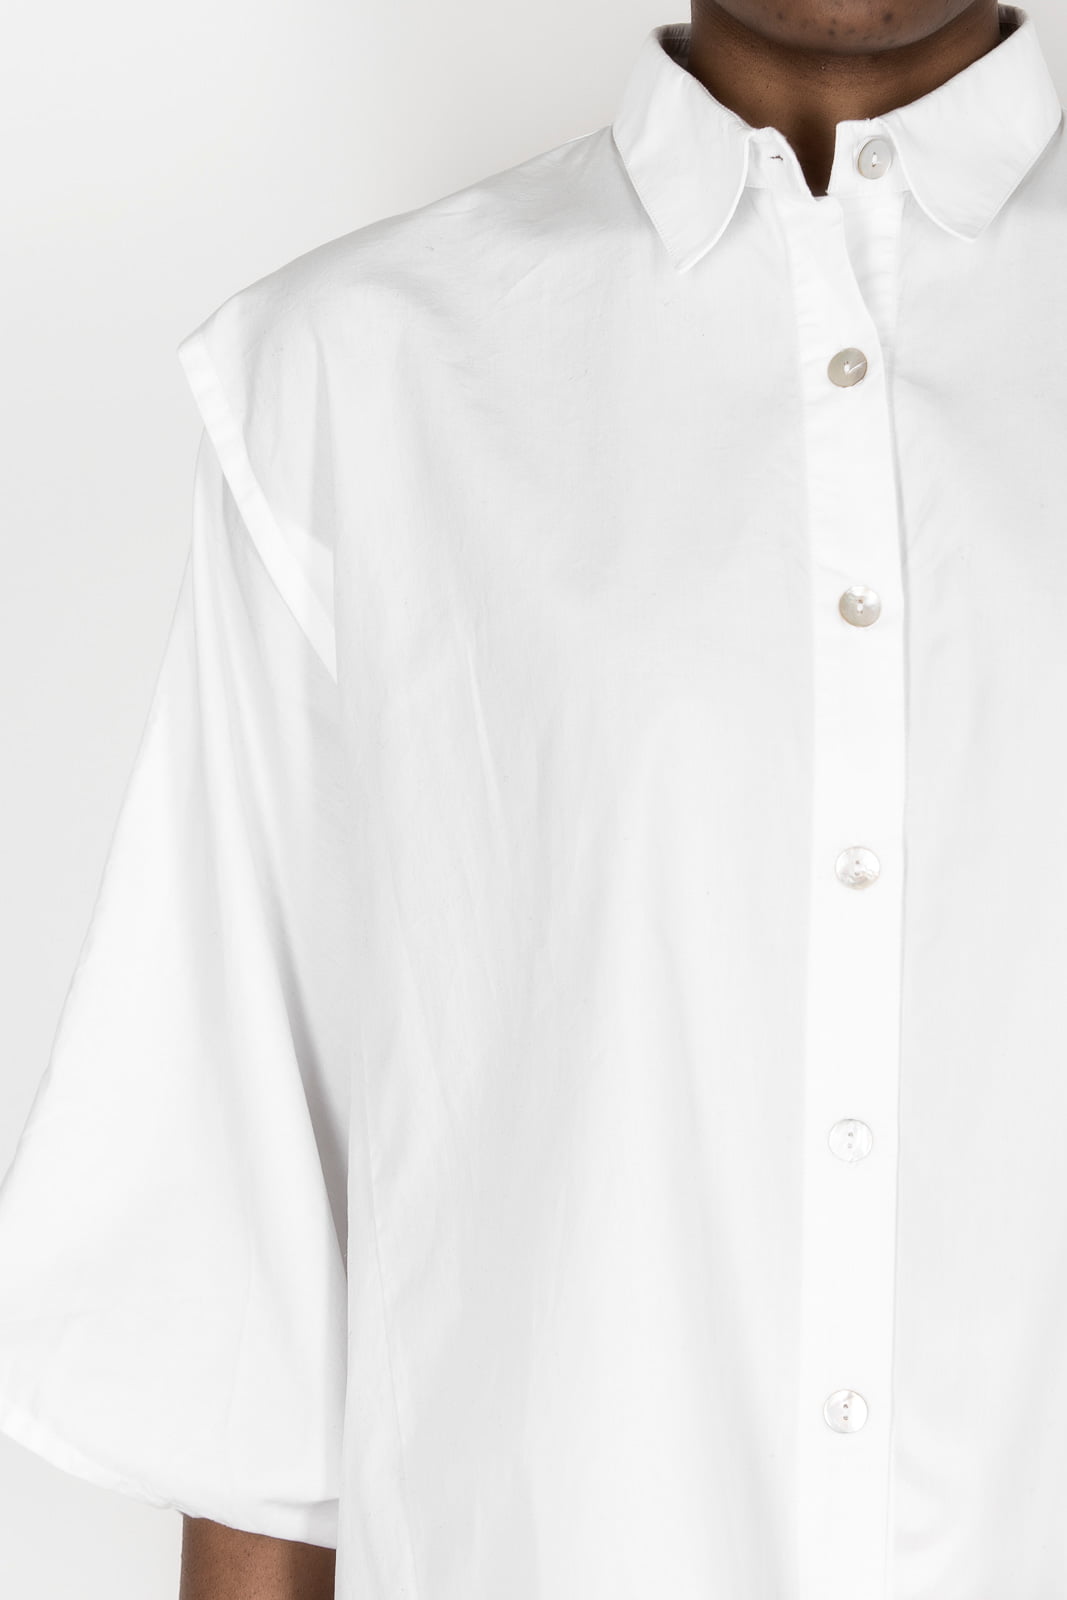 Chemise blanche haute couture Imane Ayissi